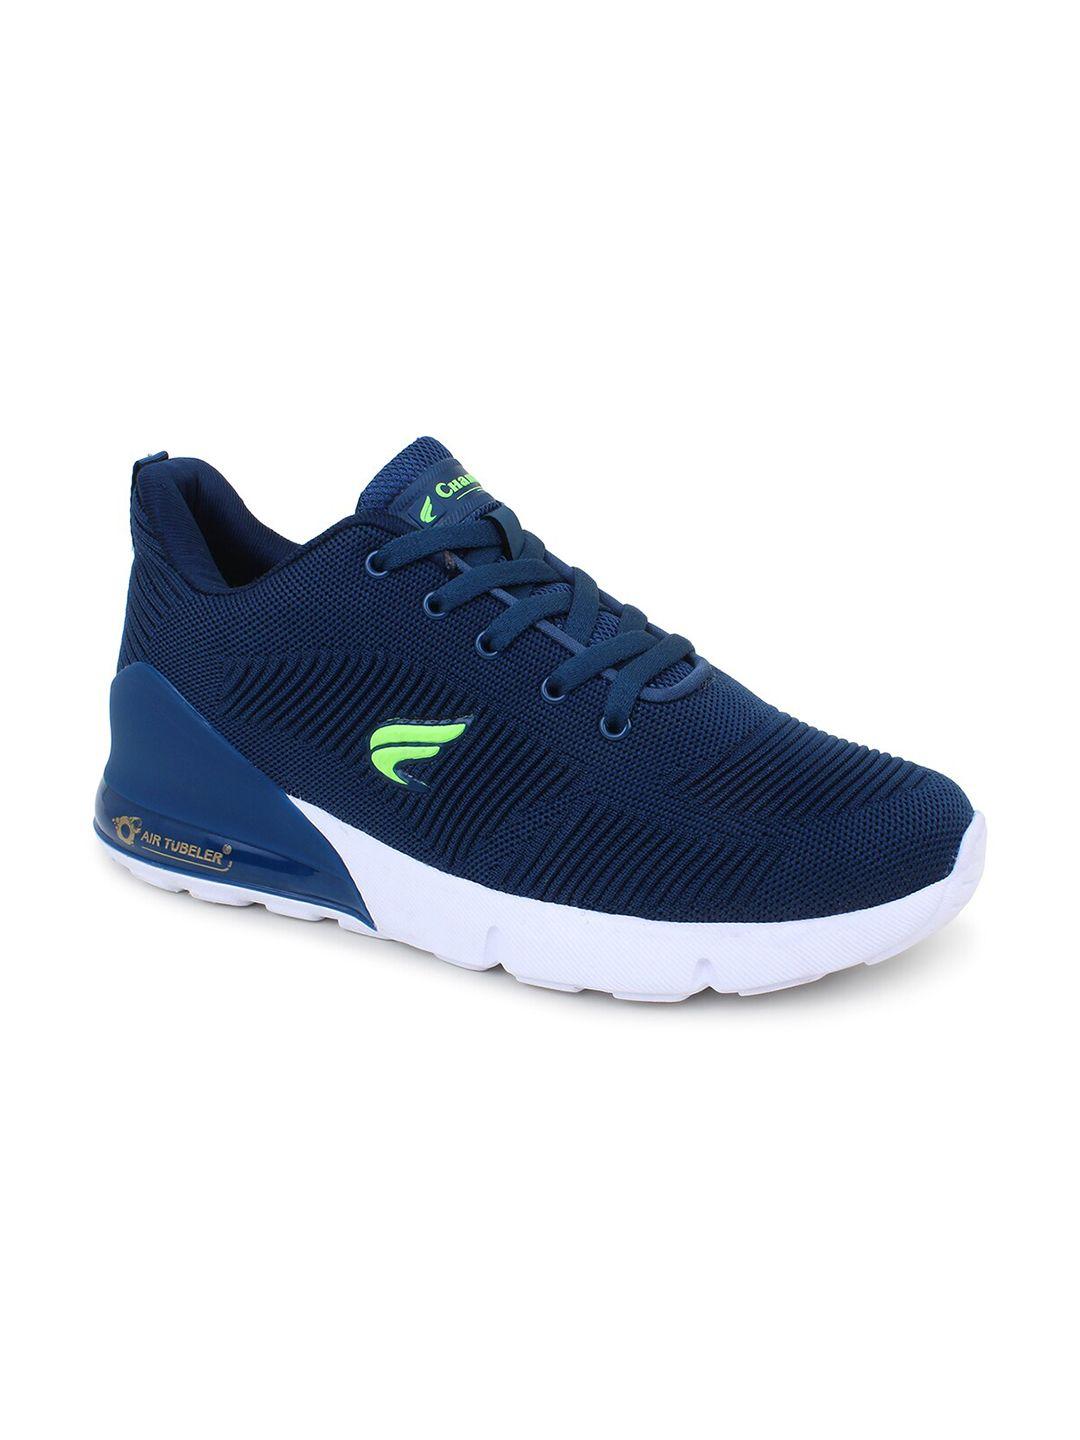 champs men non-marking running shoes